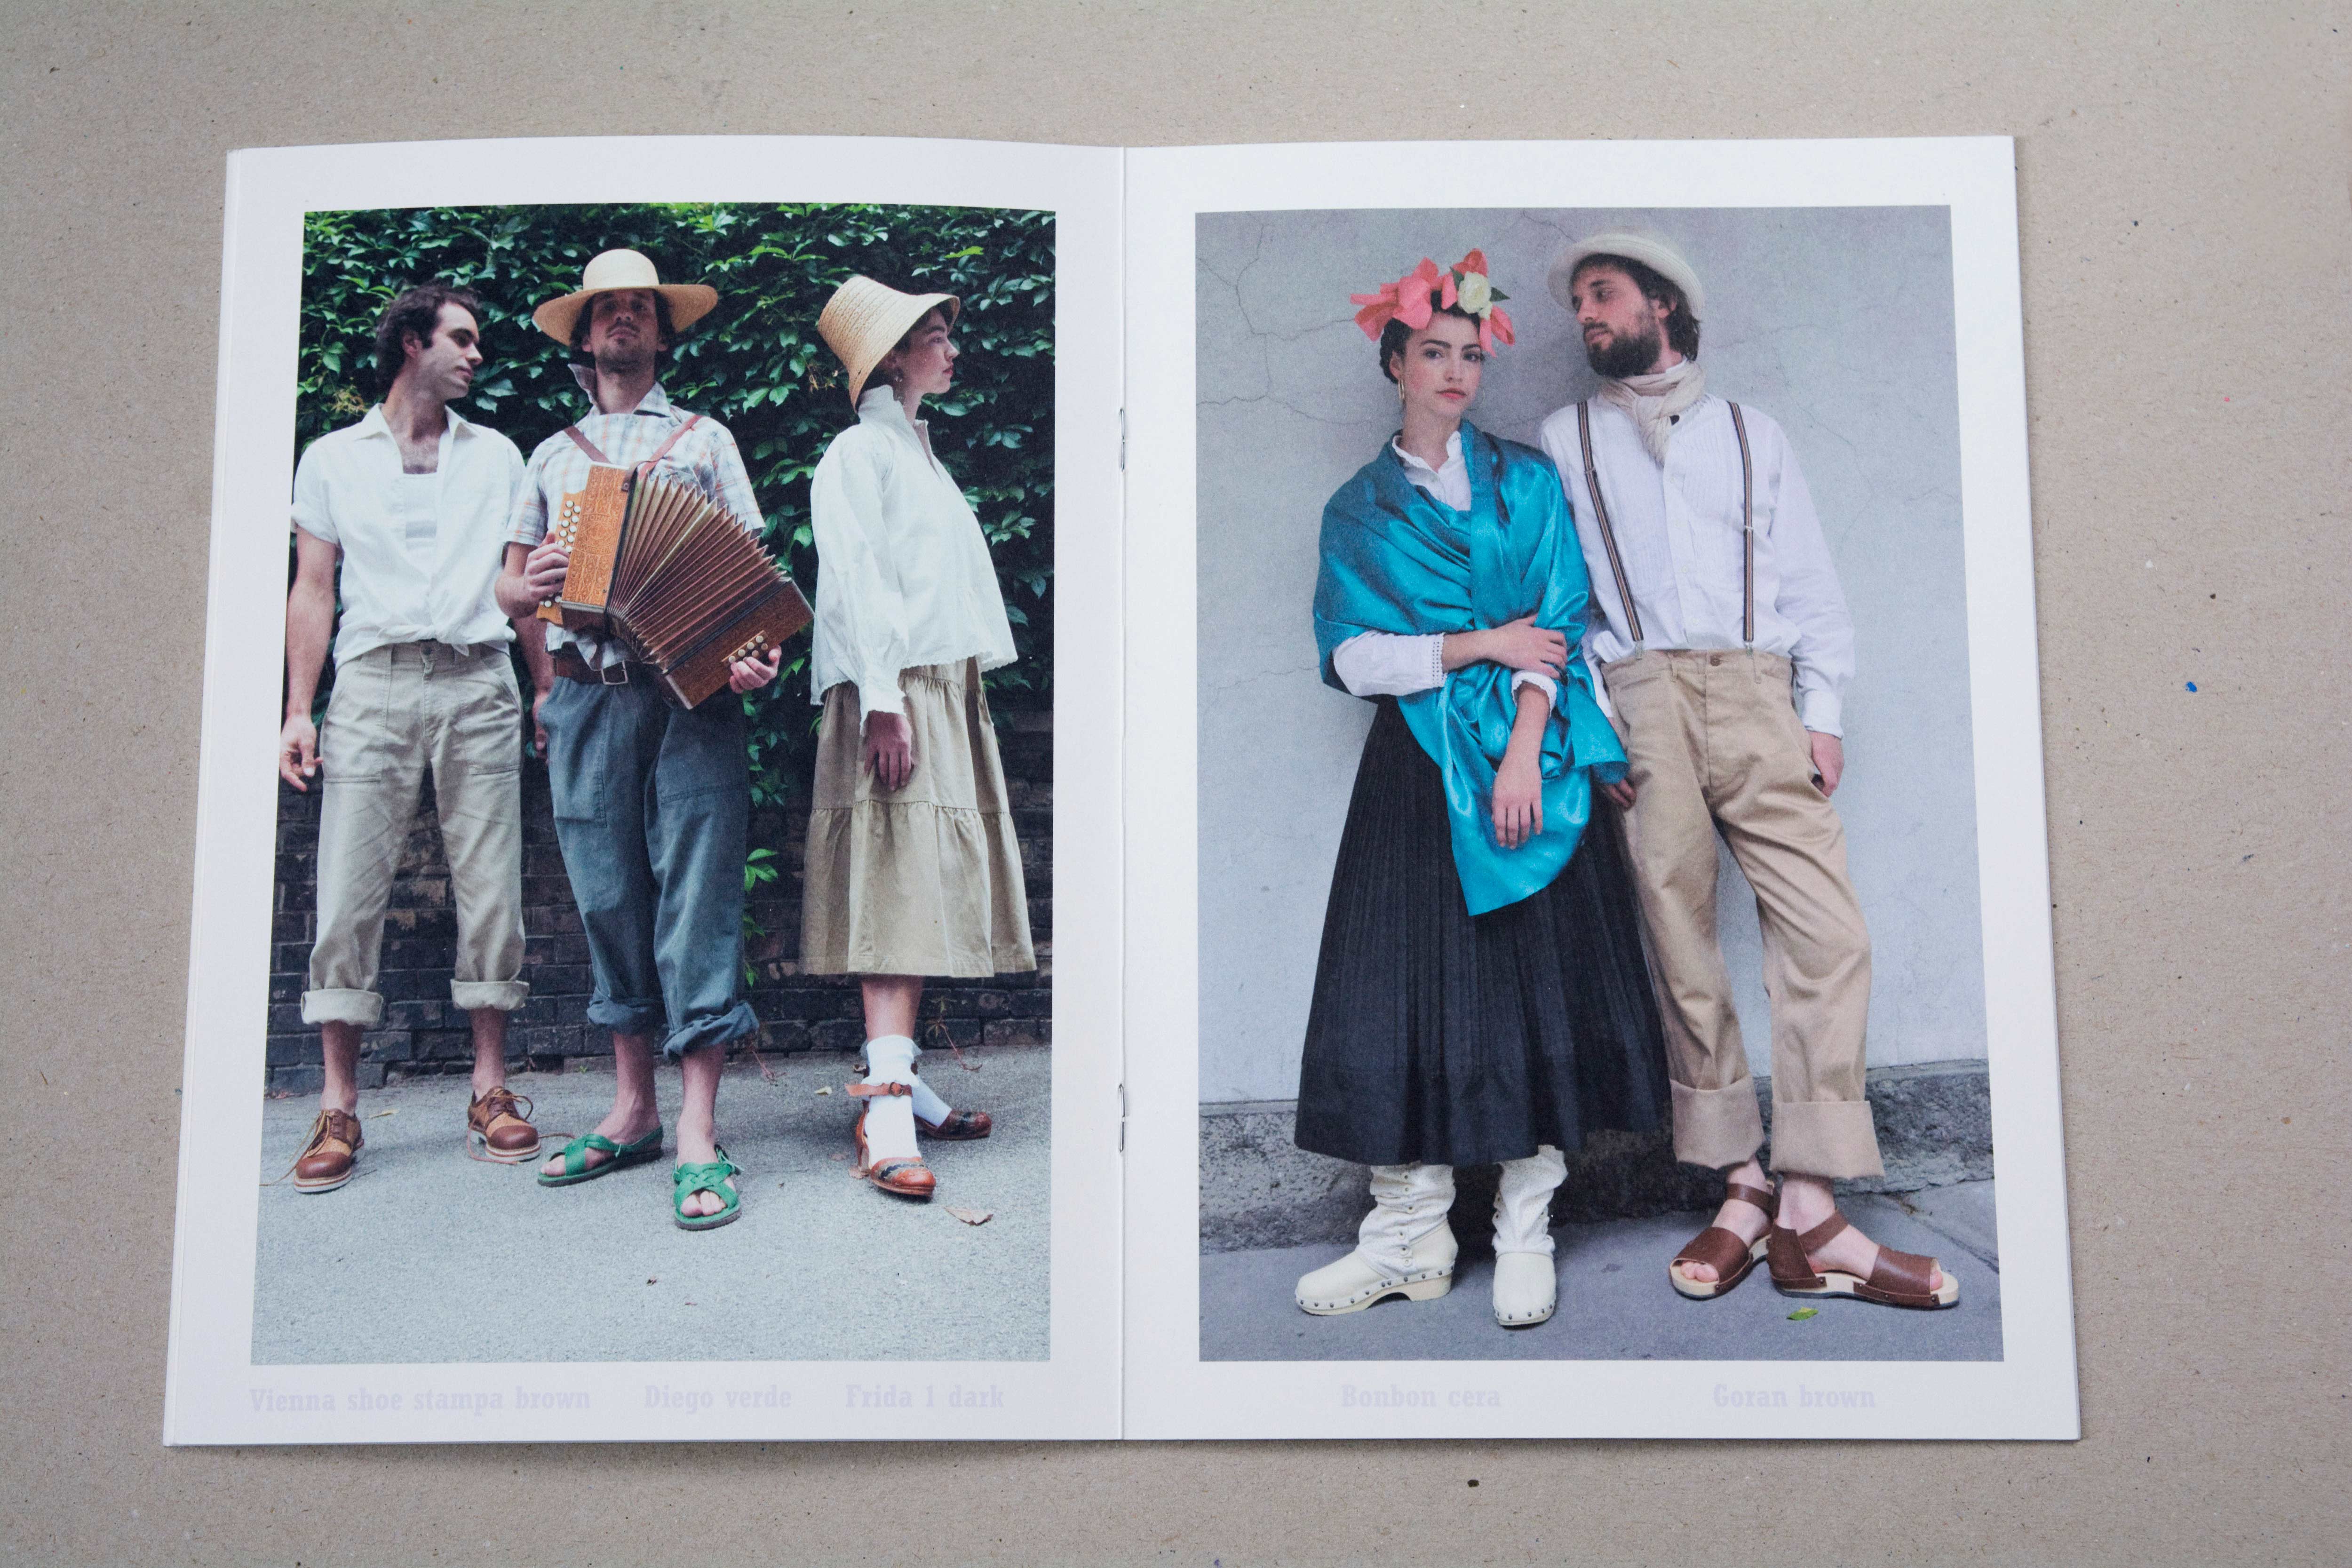 Double page. Large photo on each page. Bold font at bottom underneath photo. Left: 1 woman and 2 men standing on the street in front of an overgrown brick wall. One man holds an accordion. Right: Couple leaning against wall.